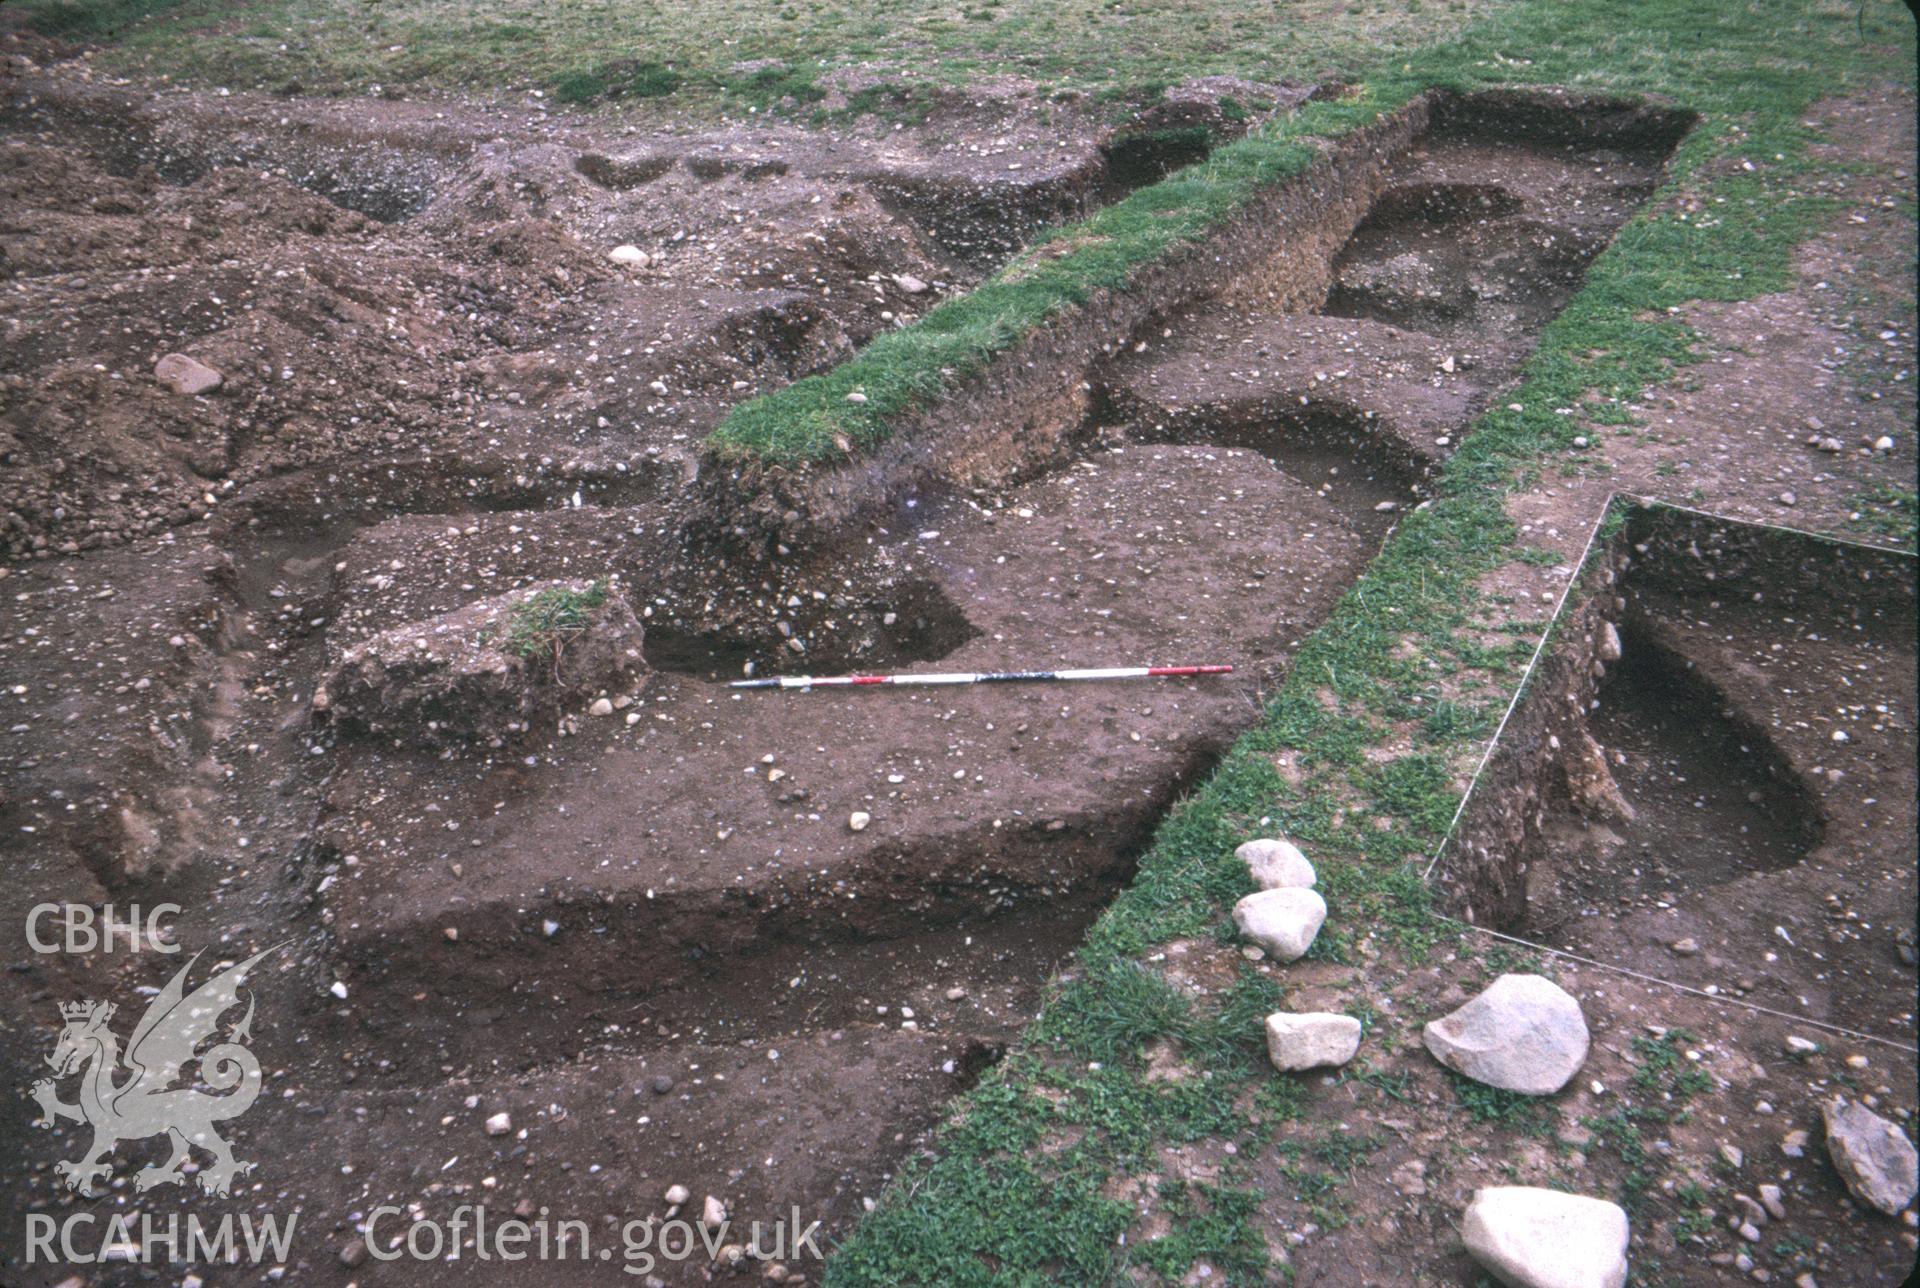 Colour slide showing excavation of a wooden church at Llandygai.